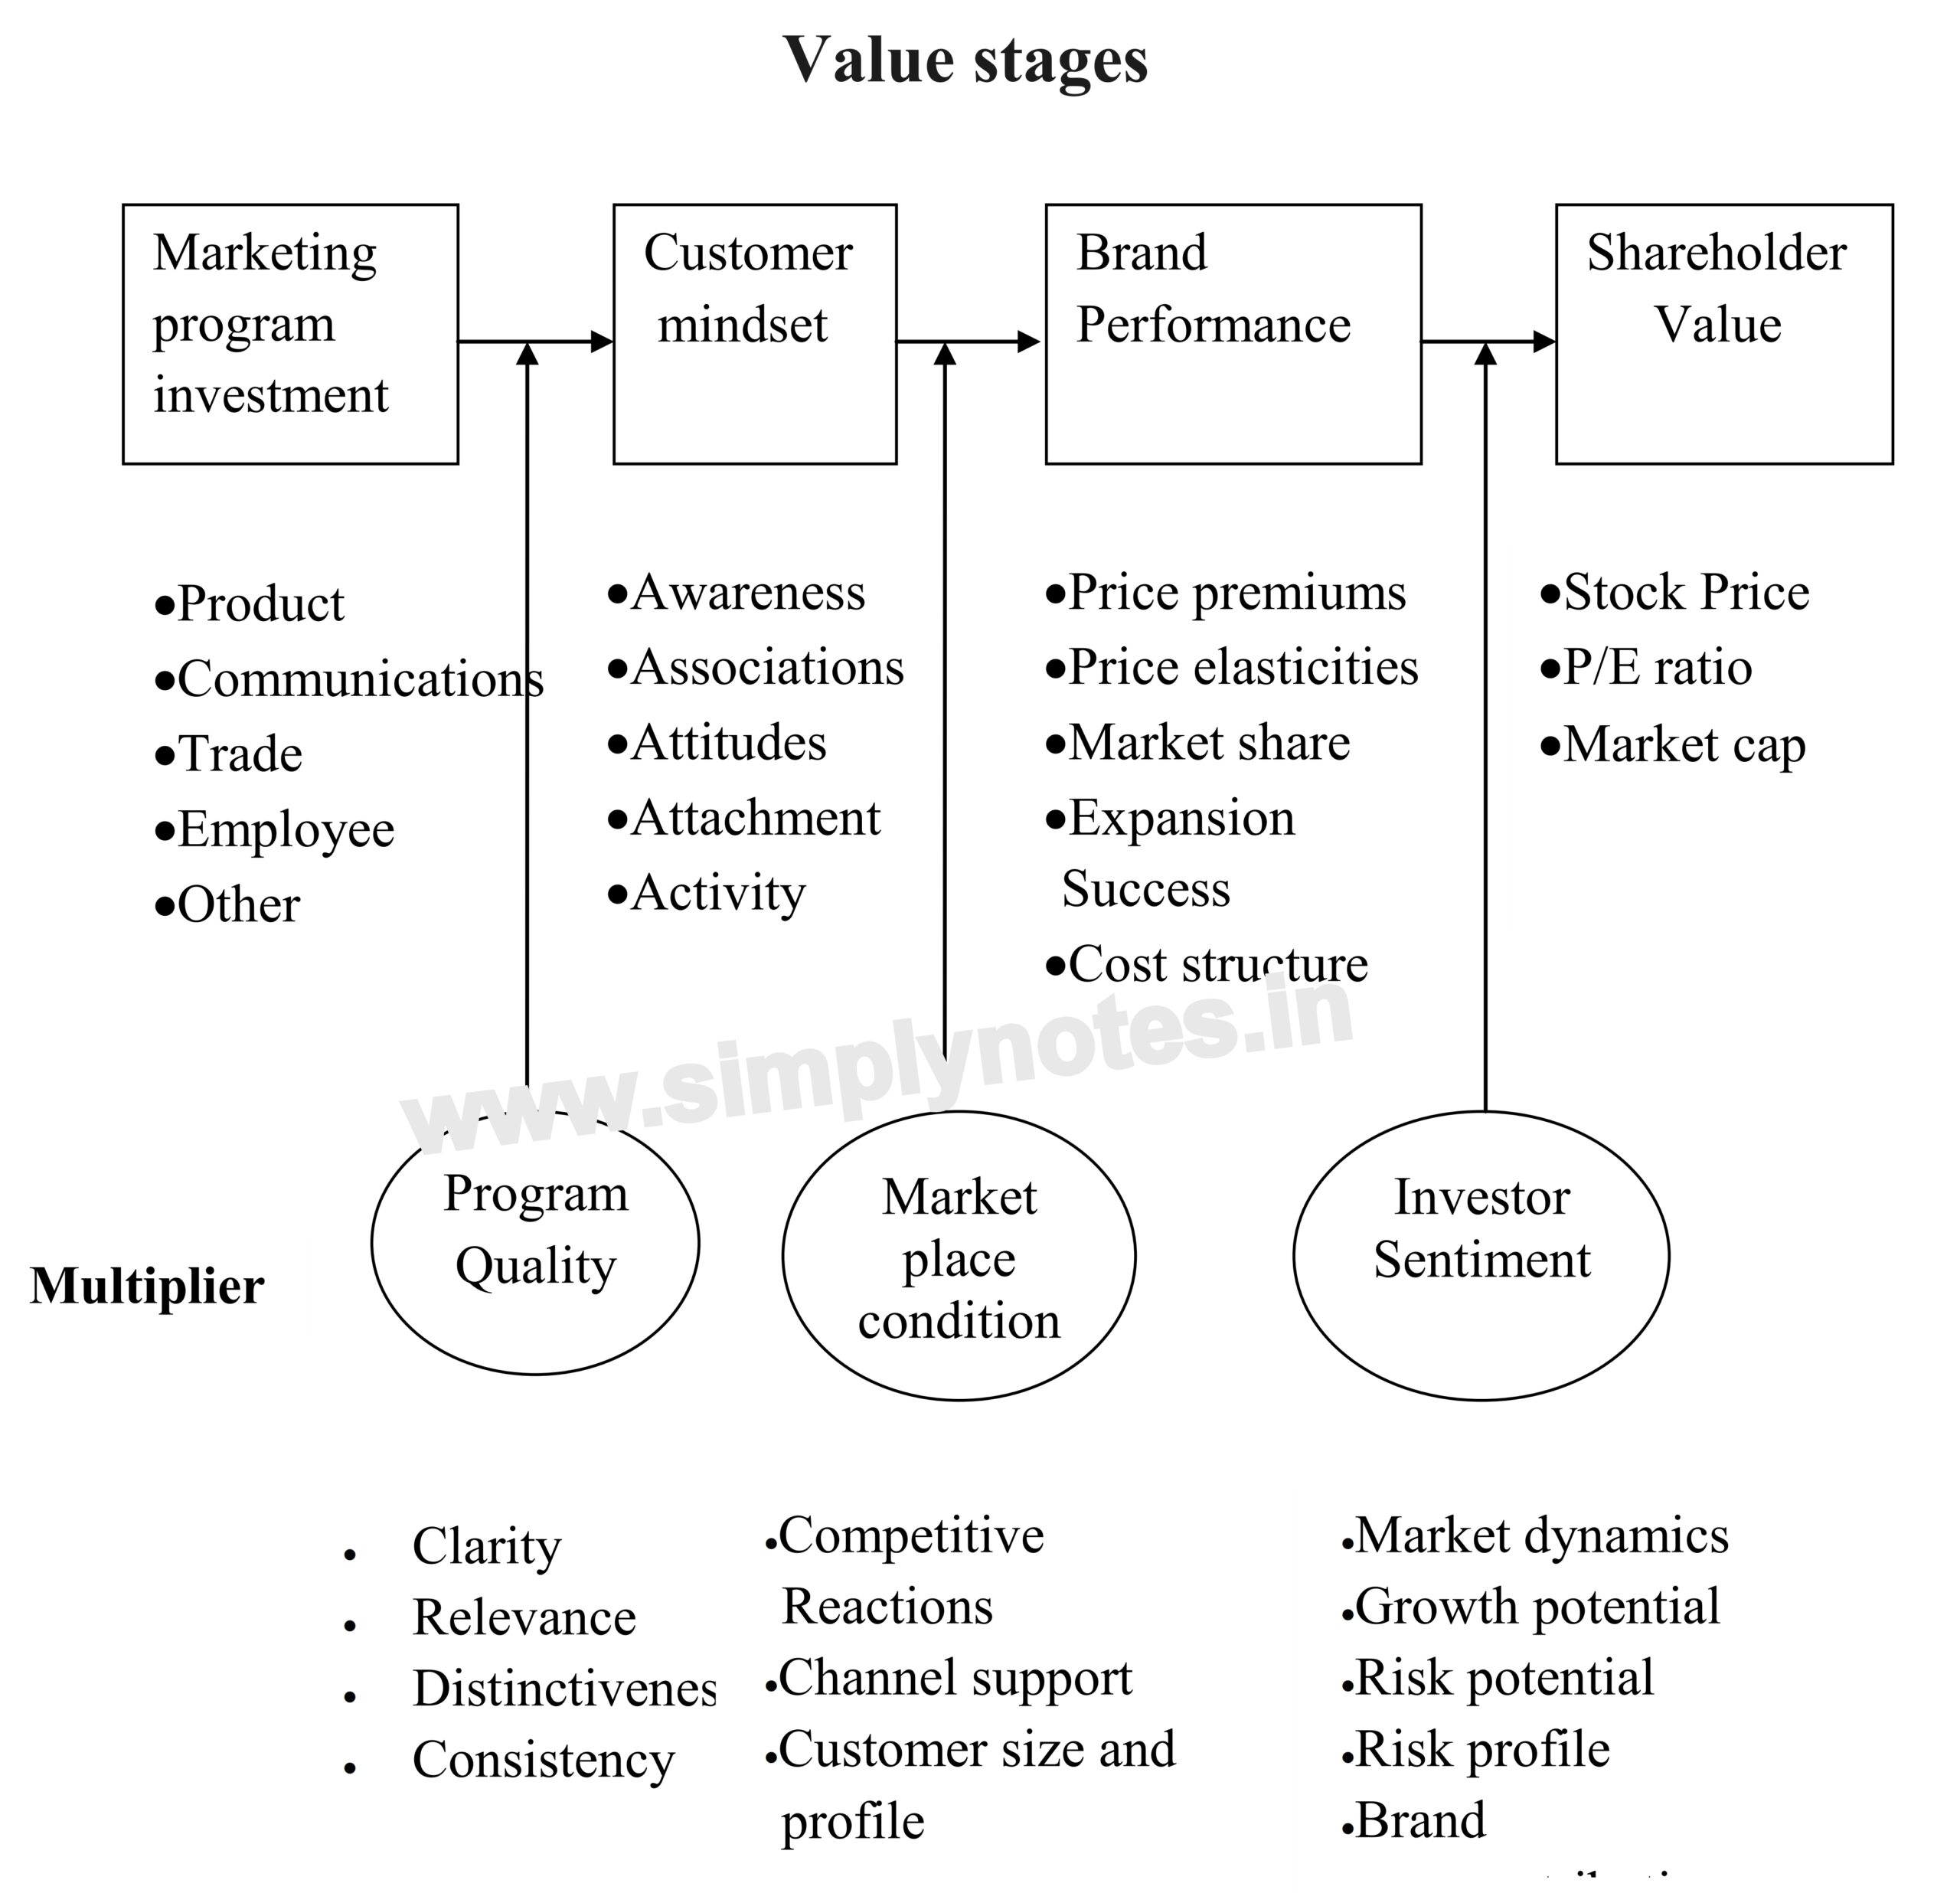 values stages 